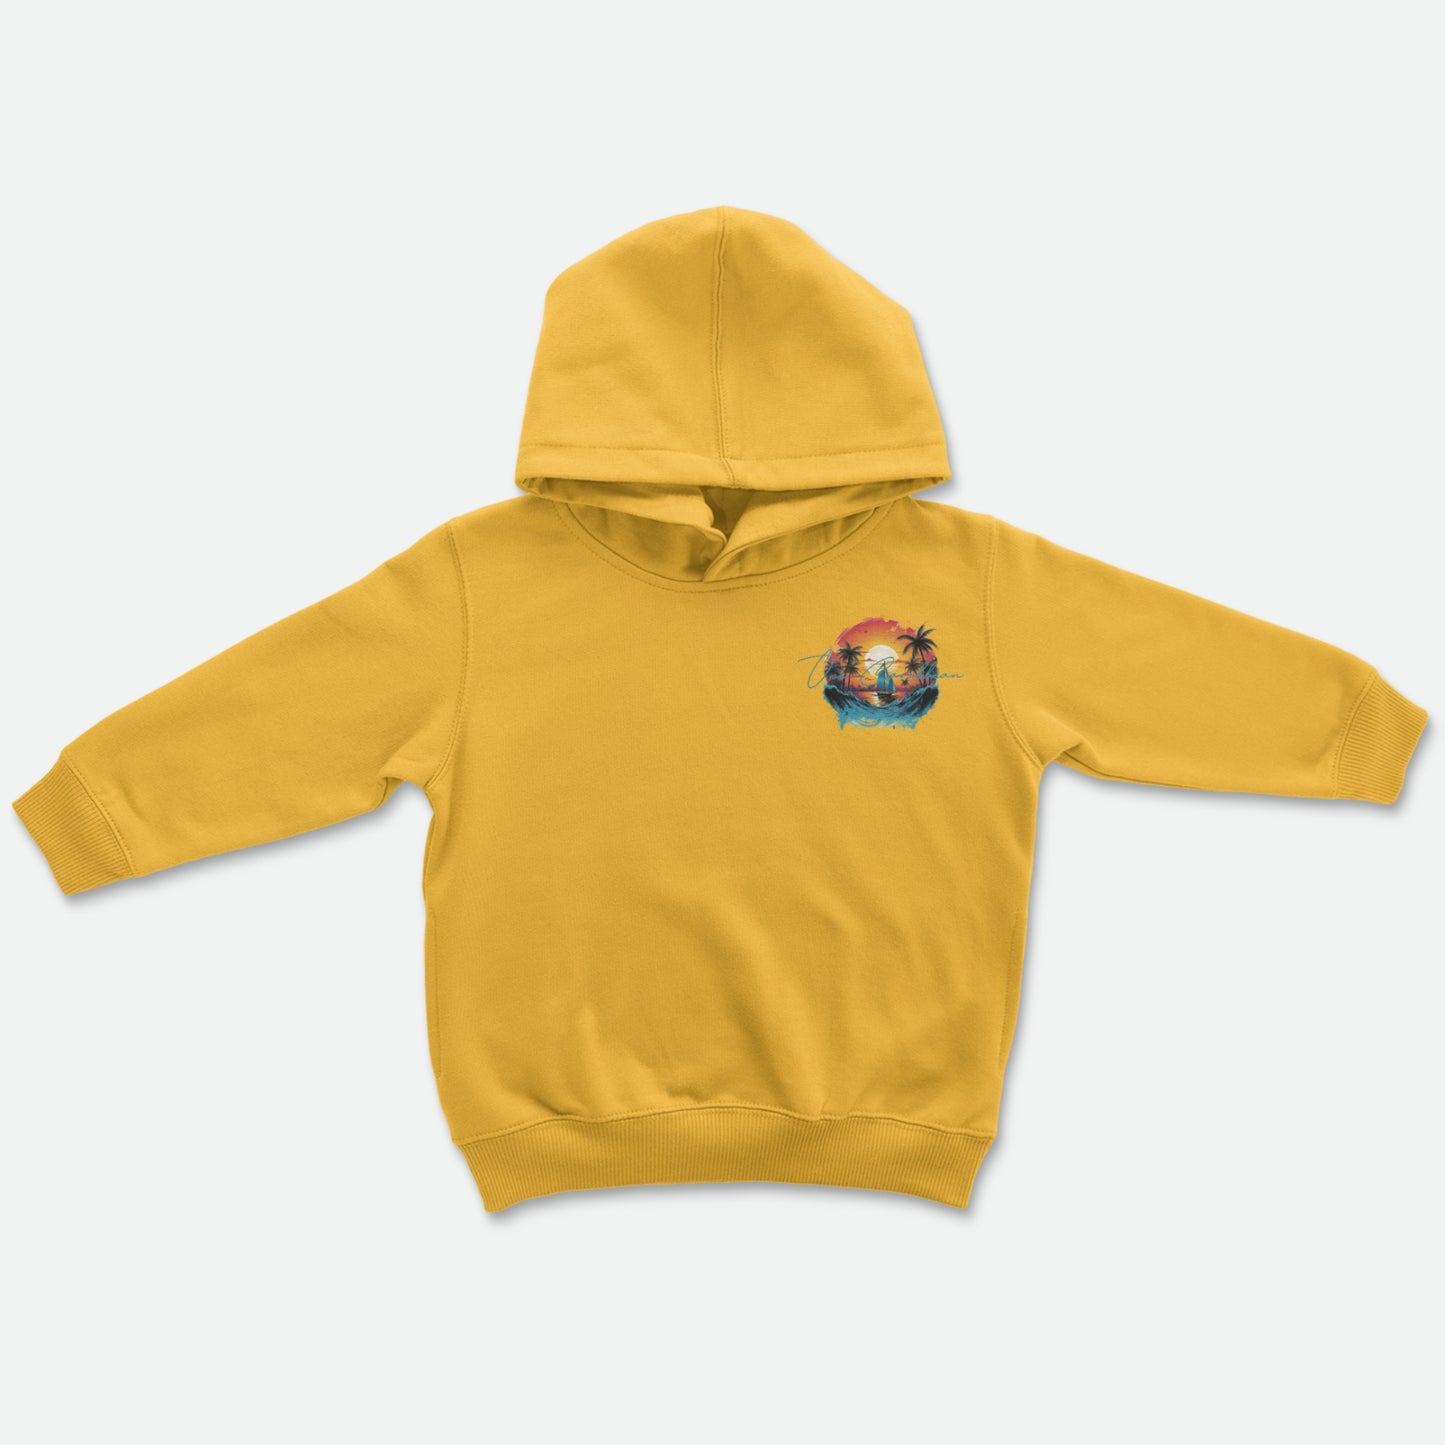 One Caribbean Youth Graphic Hoodie (Caribbean Oasis) Pre-order 9/23